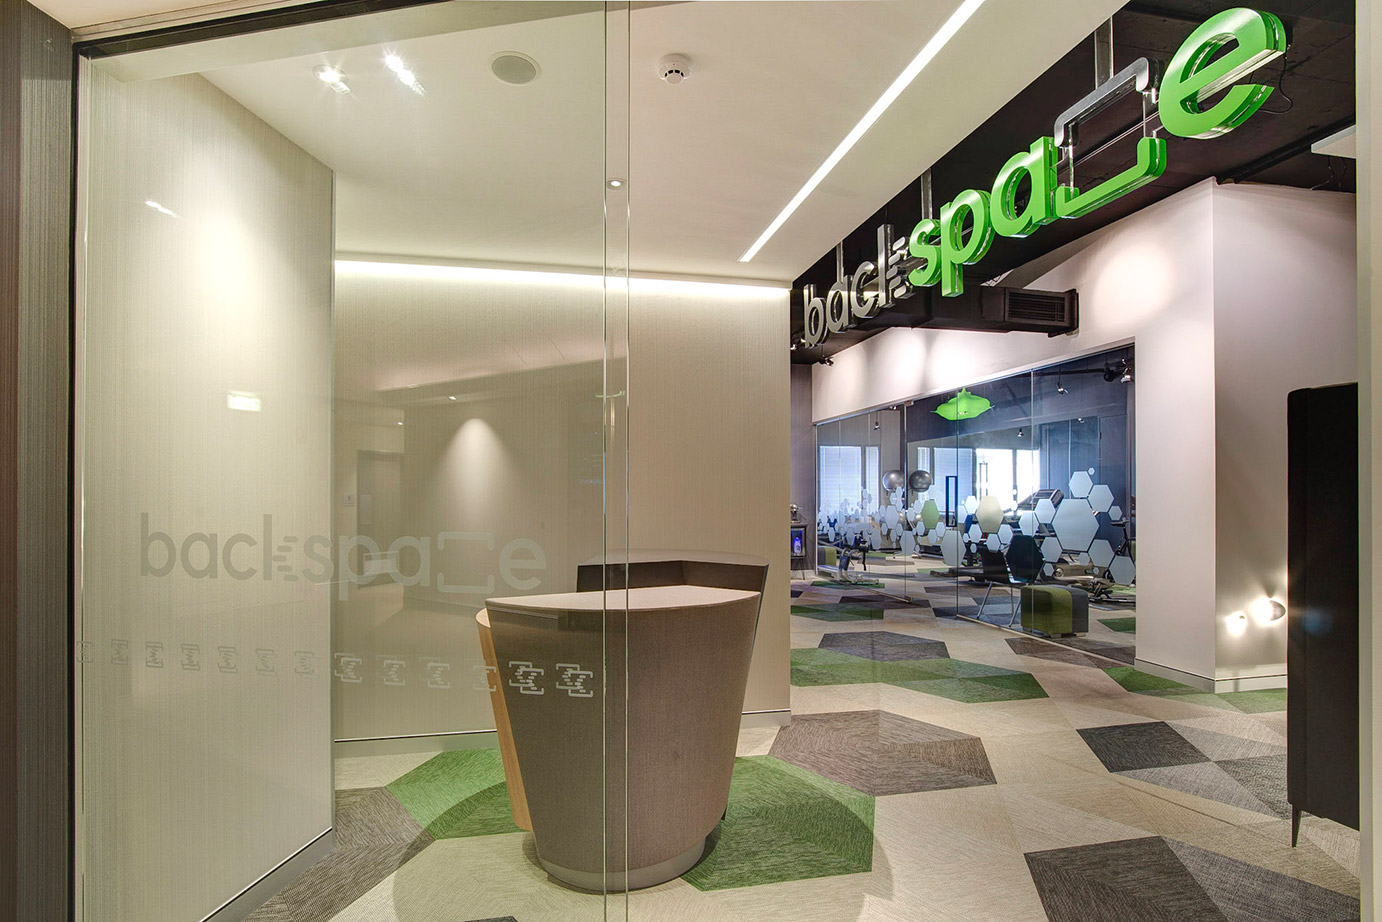 Backspace Clinic - fitout completed by Formula Interiors